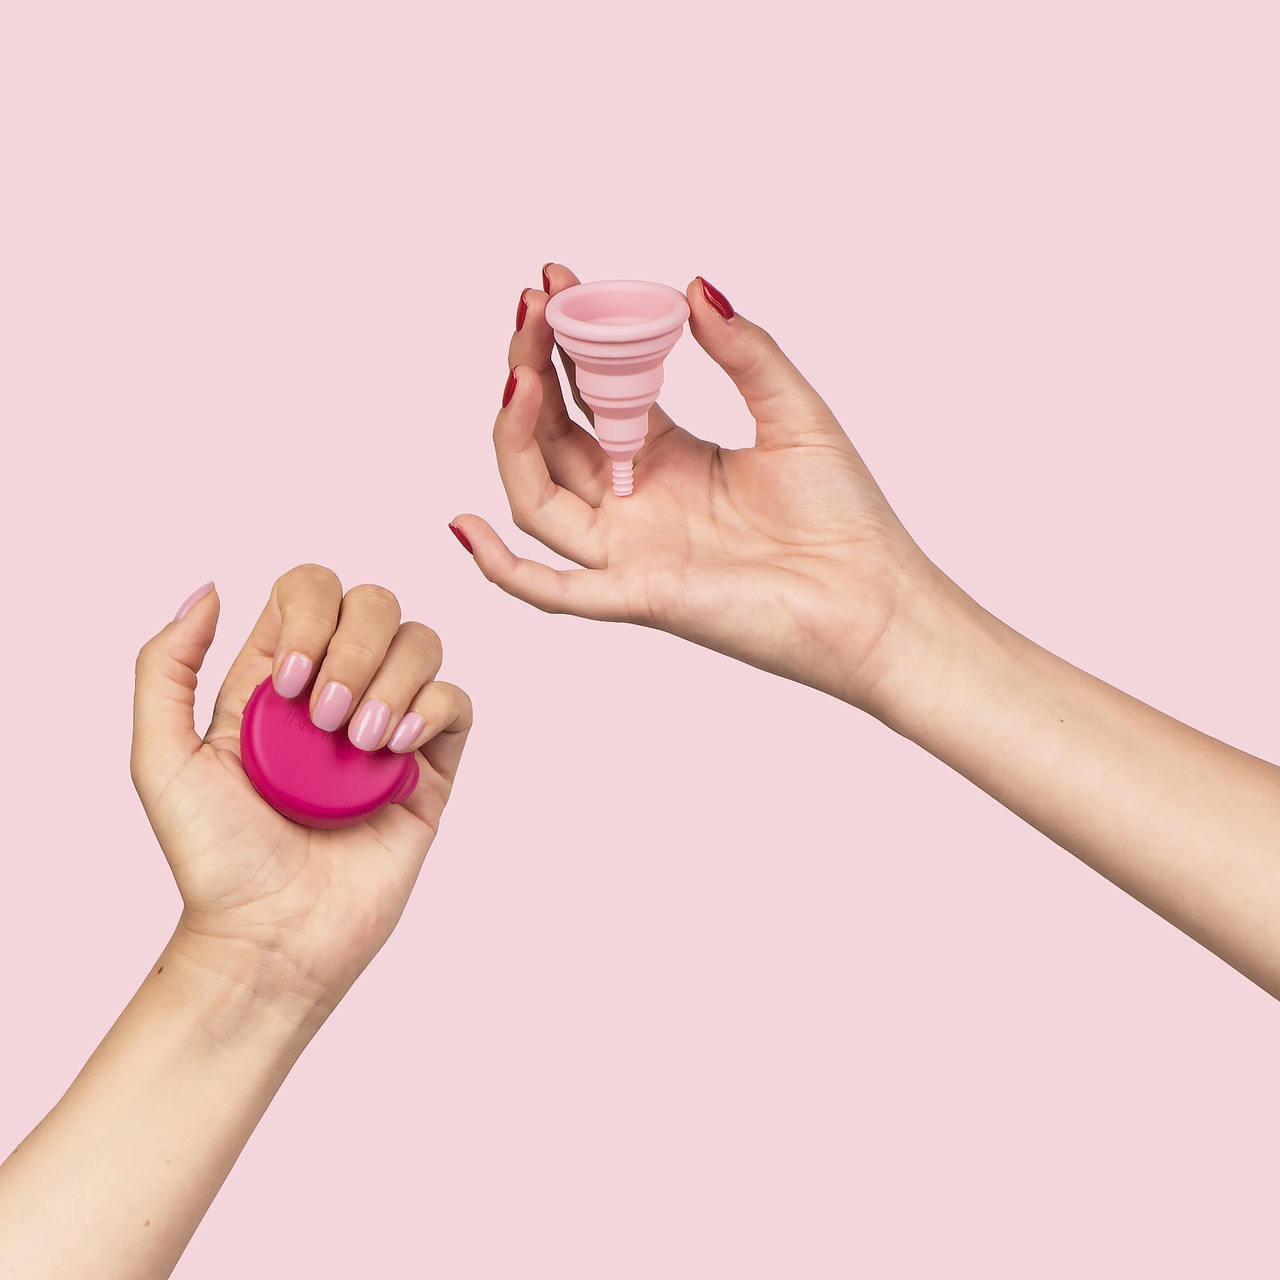 My reusable menstrual care regime - how to choose a menstrual cup and the products I recommend